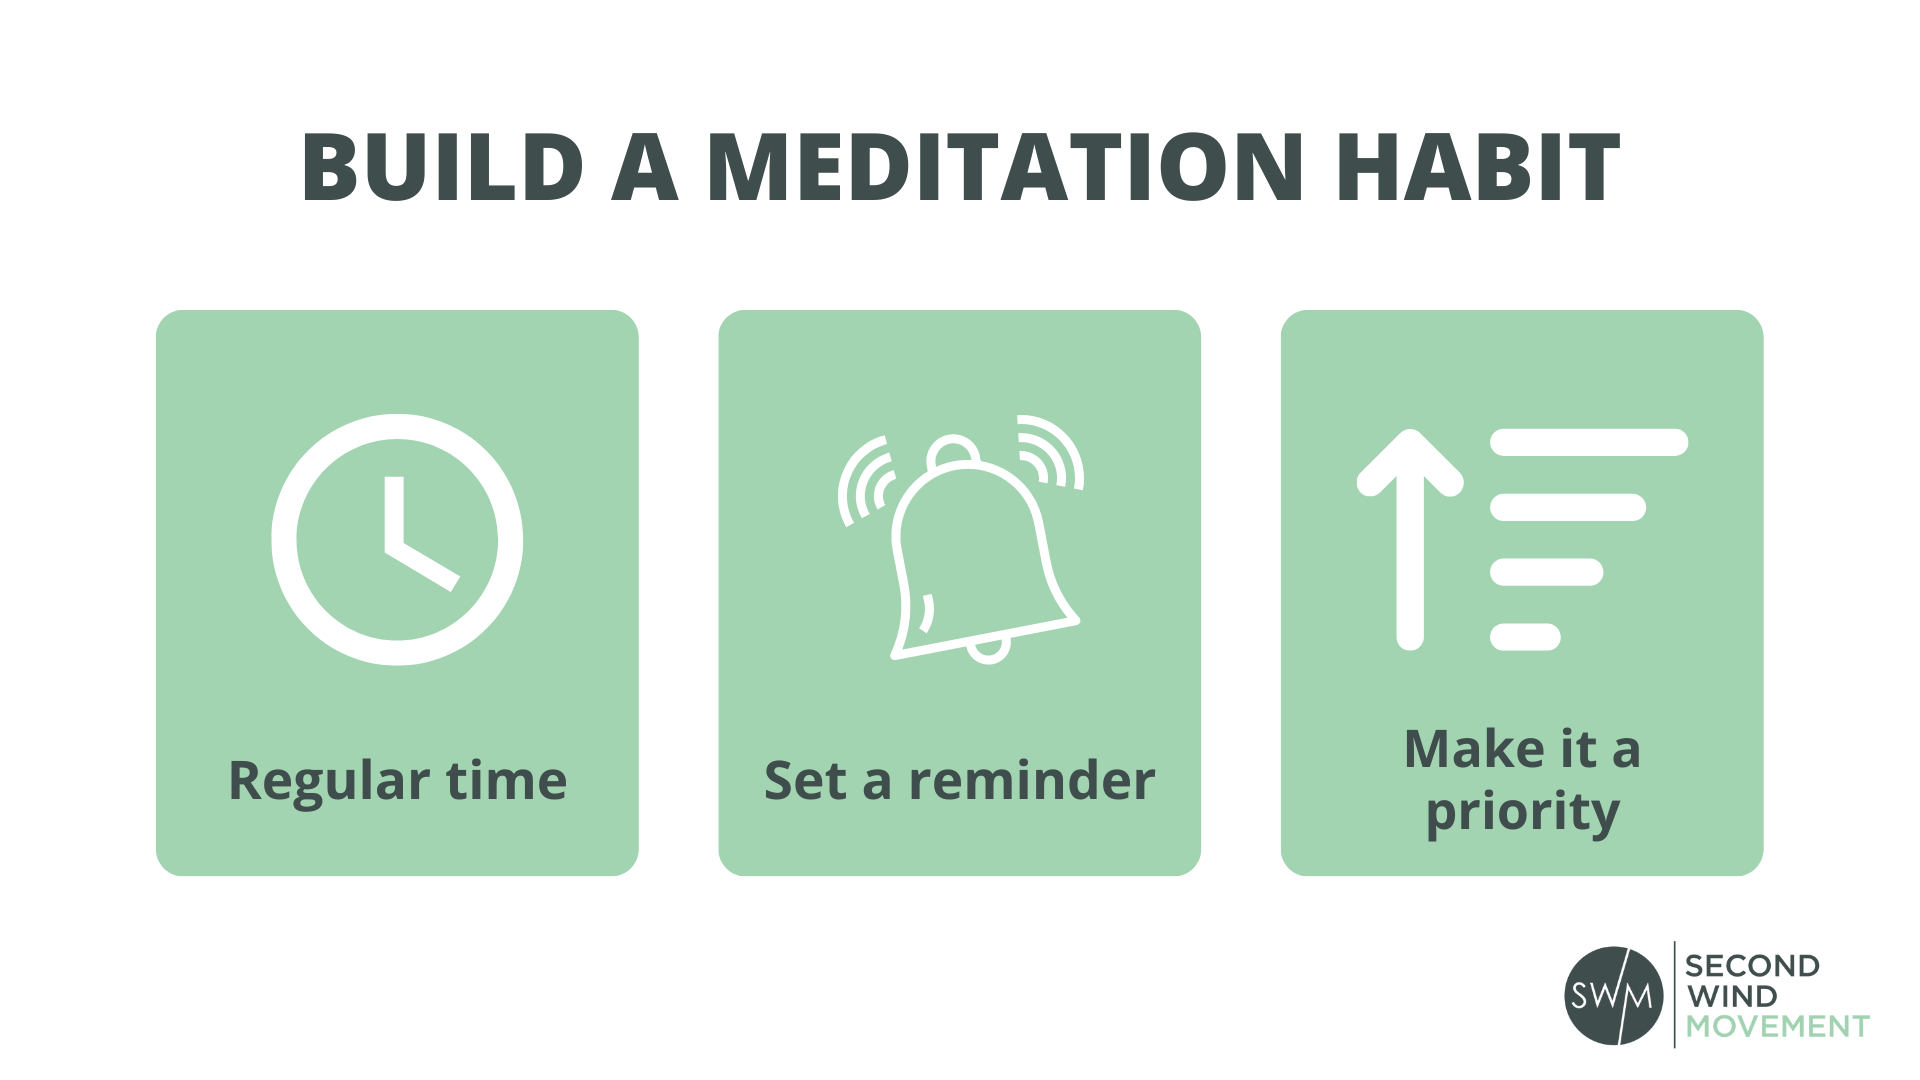 build a meditation habit by setting a regular time, a reminder, and making it a priority